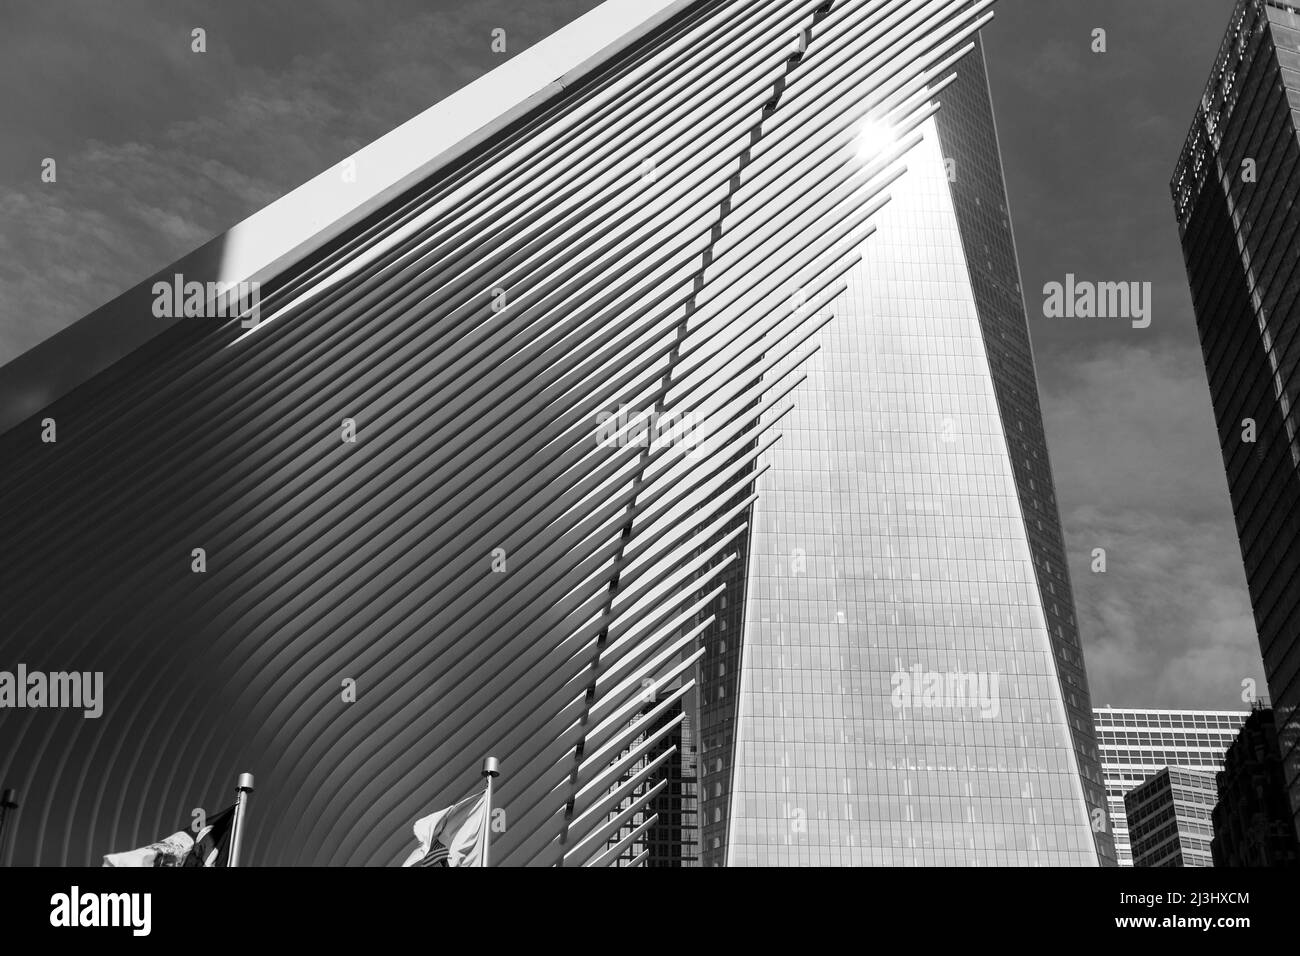 WTC CORTLANDT, New York City, NY, USA, World Trade Center Transportation Hub or Oculus designed by Santiago Calatrava architect in Financial District view from the outside Stock Photo